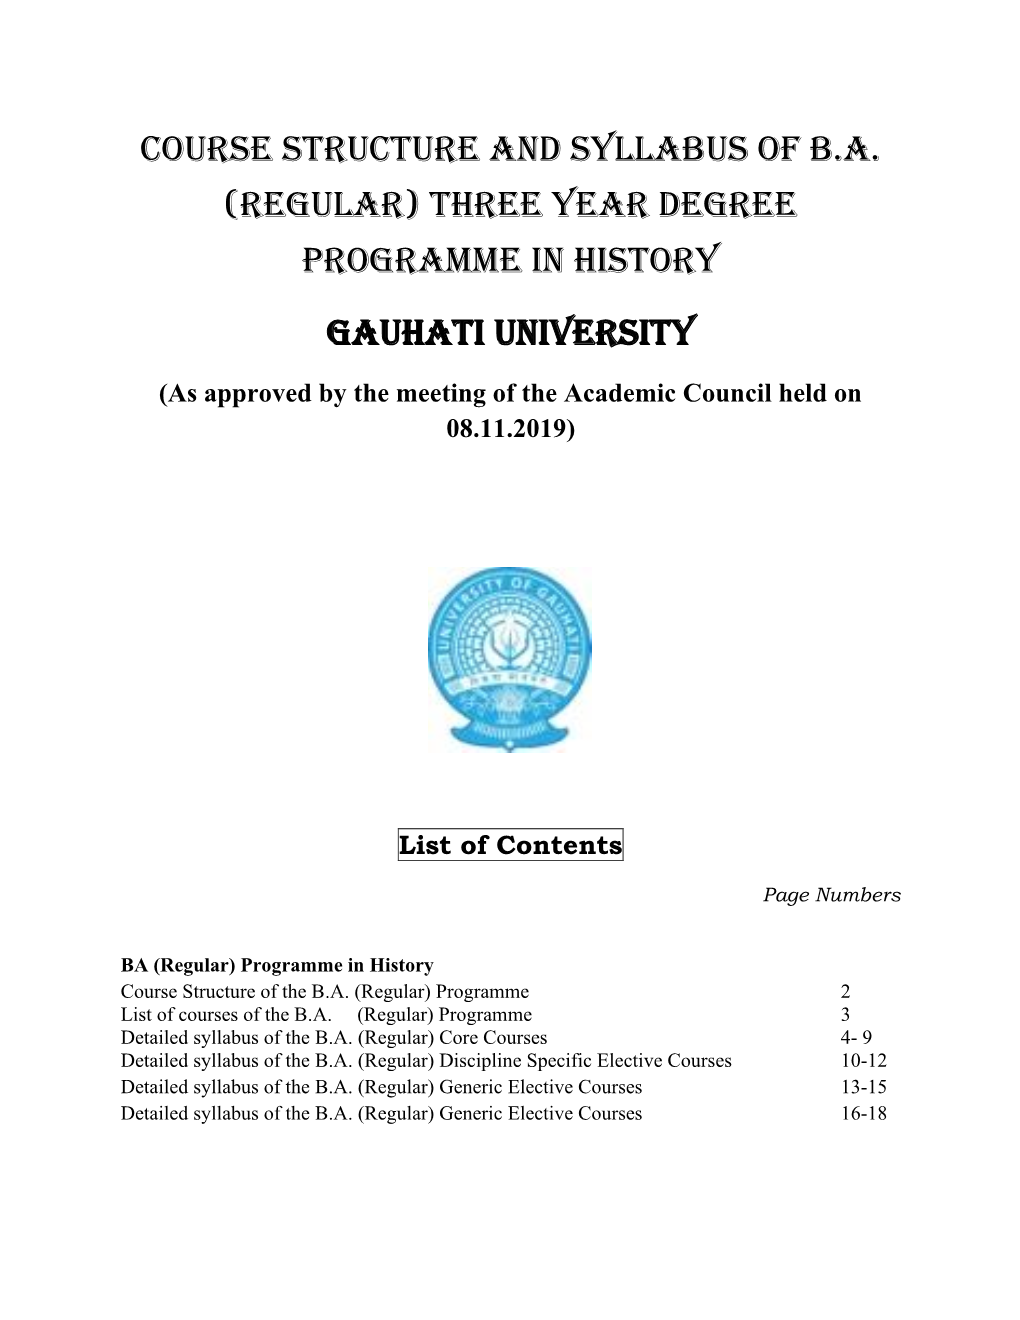 Course Structure and Syllabus of B.A. (Regular) Three Year Degree Programme in History